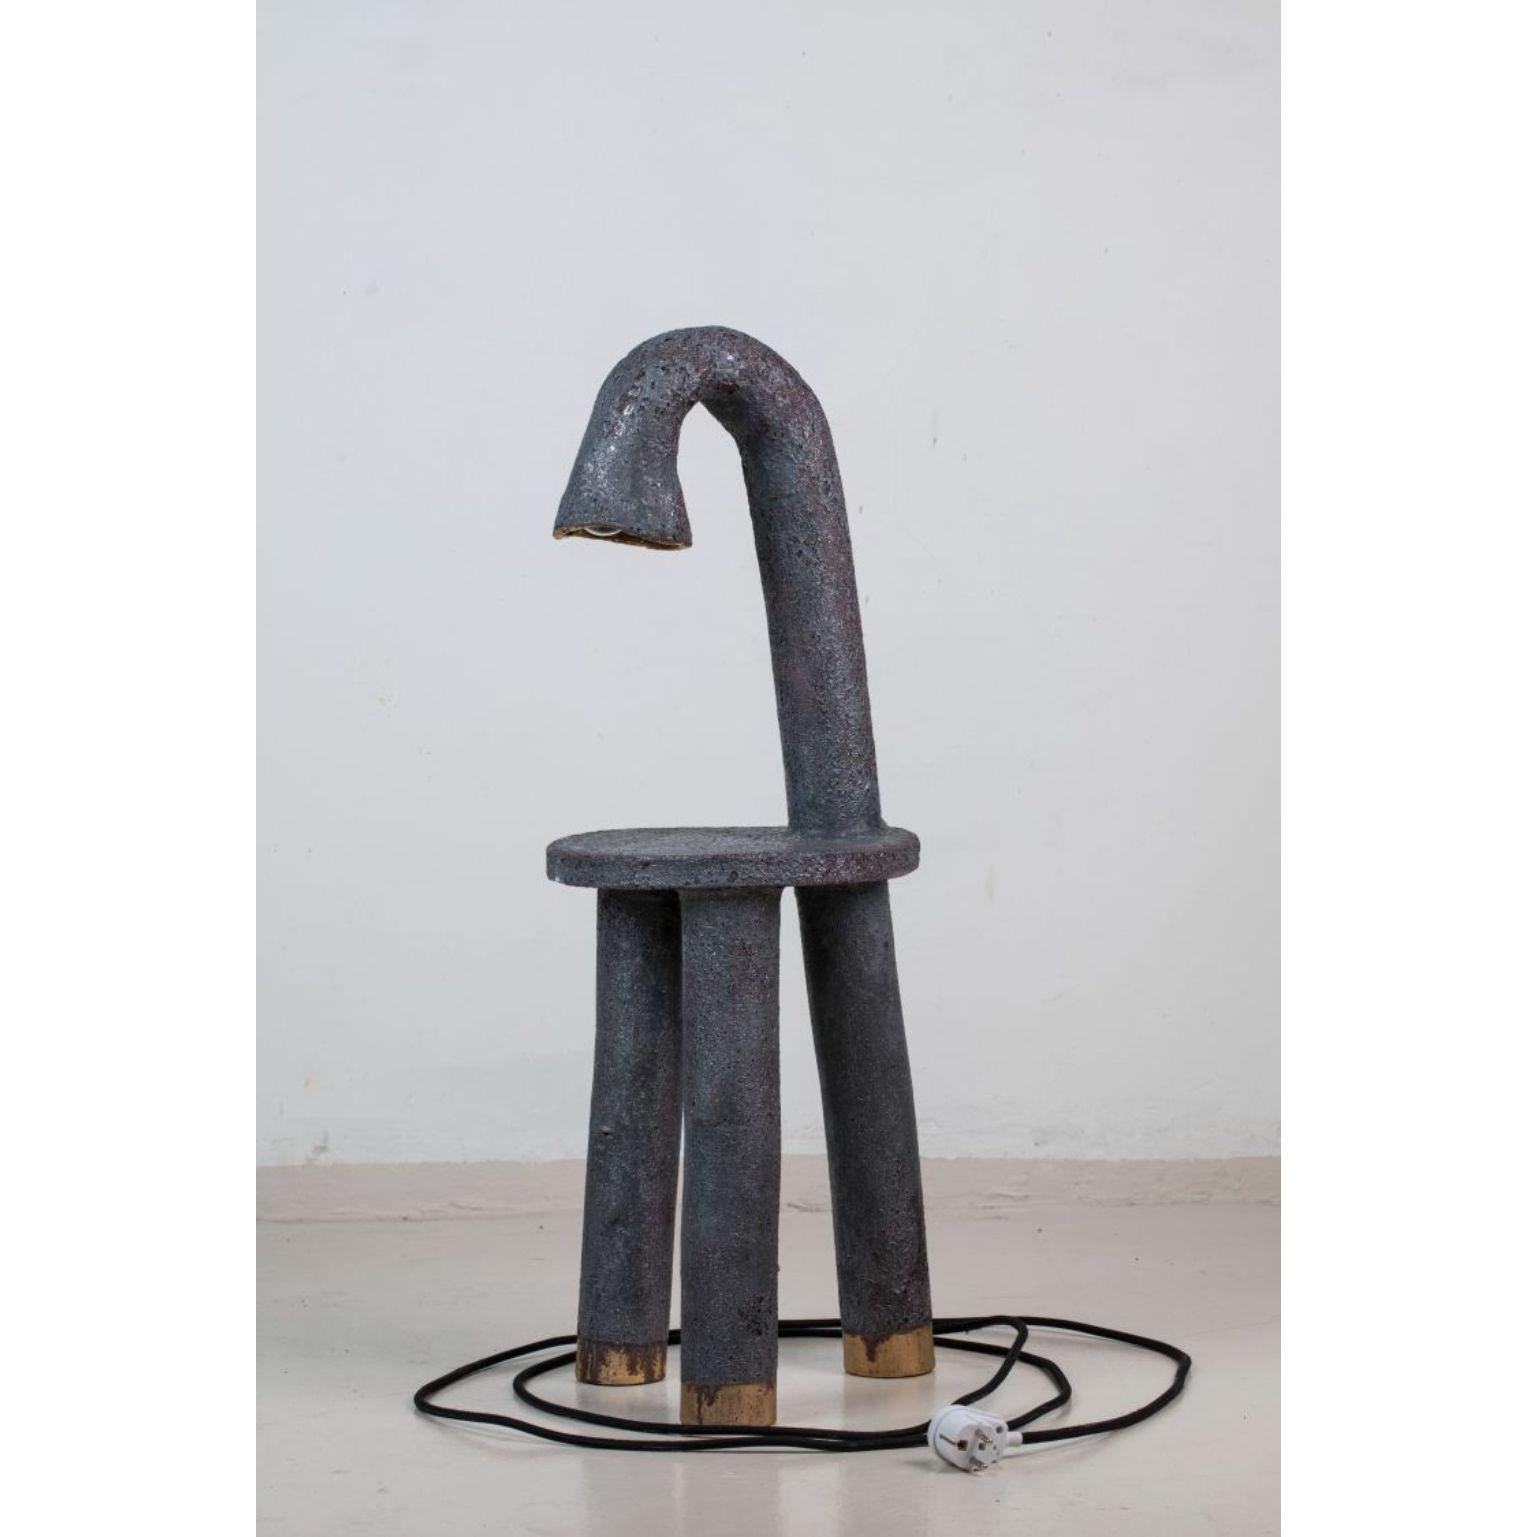 Big lamp with table by Milan Pekar
Dimensions: D x H 82 cm
Materials: Glaze, clay

Hand-made in the Czech Republic

Established own studio August 2009 – Focus mainly on porcelain, developing own glazes. Mould makings, and Slip casting. Milan